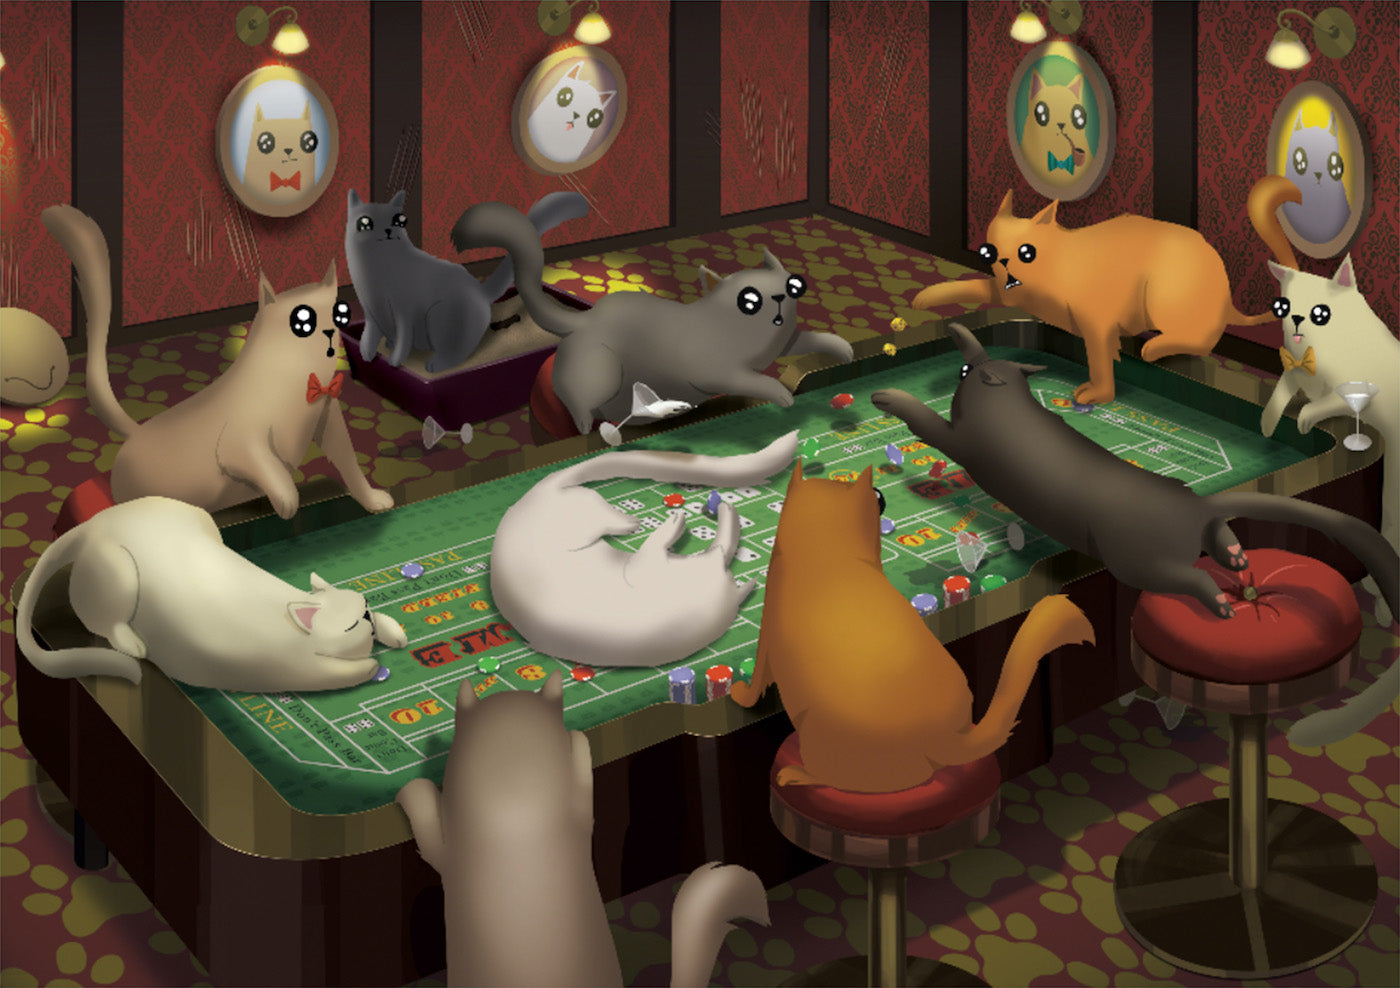 The Japanese Cat Game We Can't Stop Playing 